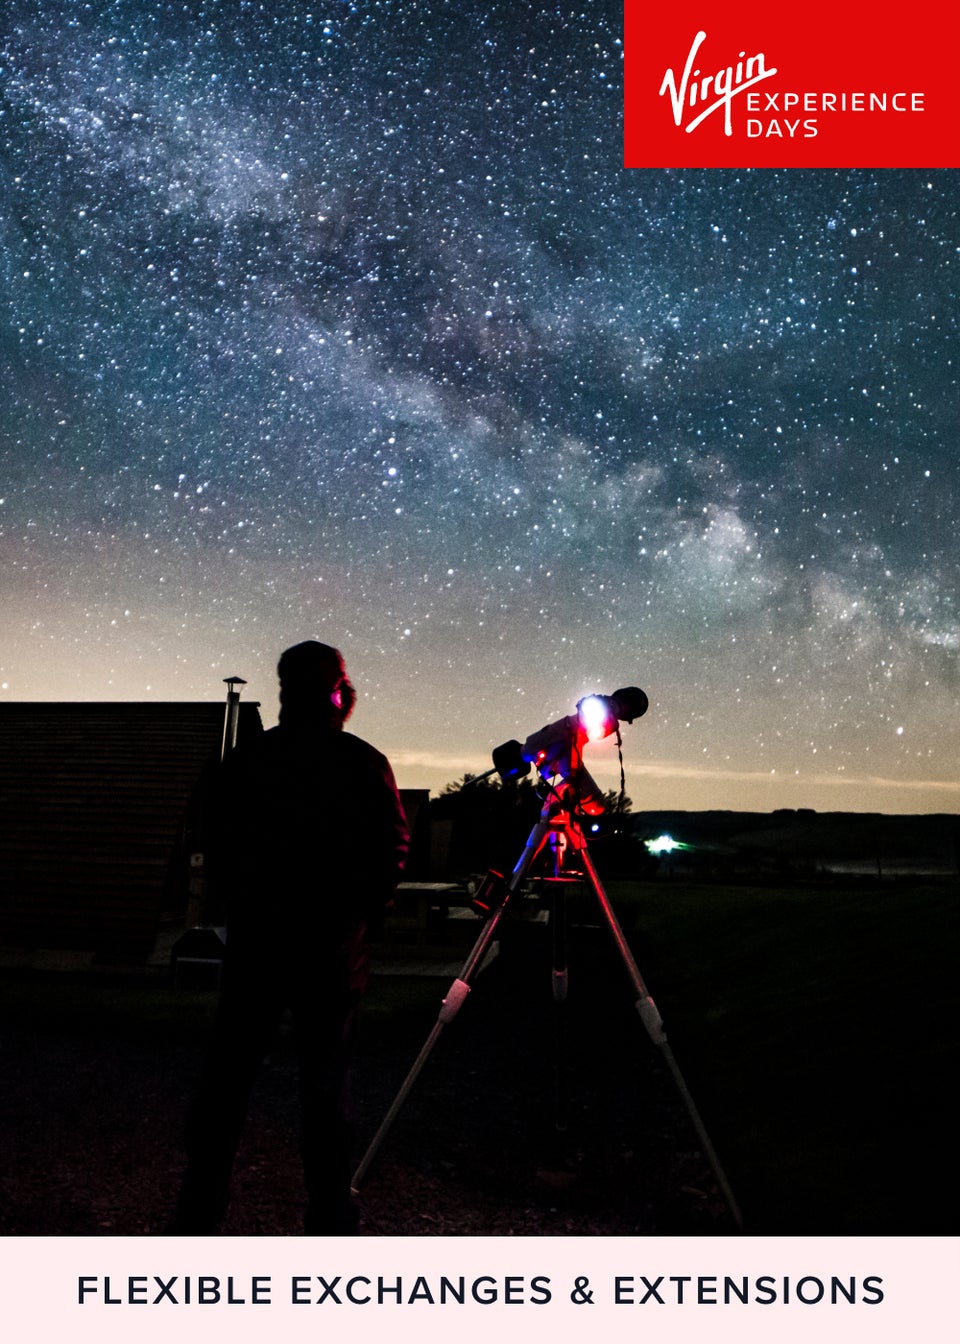 Virgin Experience Days Stargazing Experience for Two with Dark Sky Wales